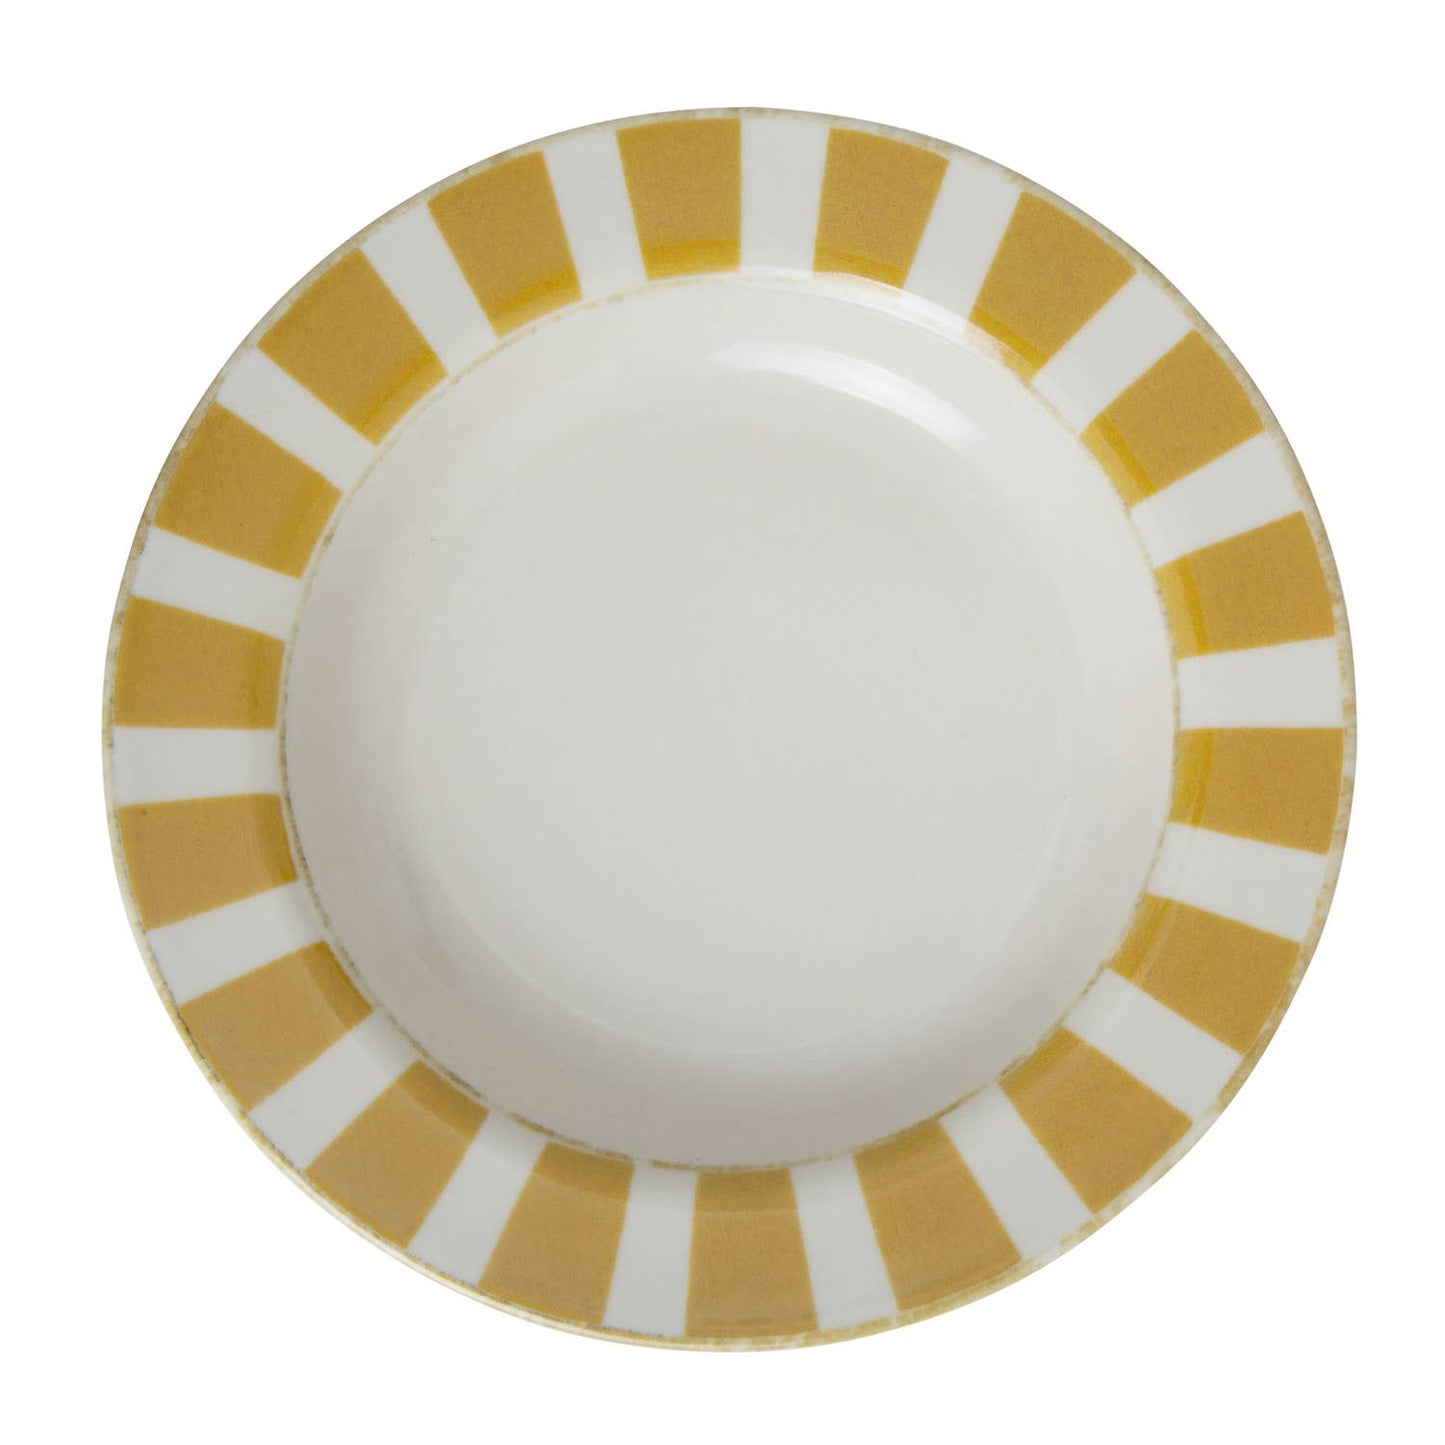 The Lino - Essentials Dinner Plate (Set Of 4) Yellow - Fenwick & OliverThe Lino - Essentials Dinner Plate (Set Of 4) YellowThe LinoFenwick & Oliver8400000007504